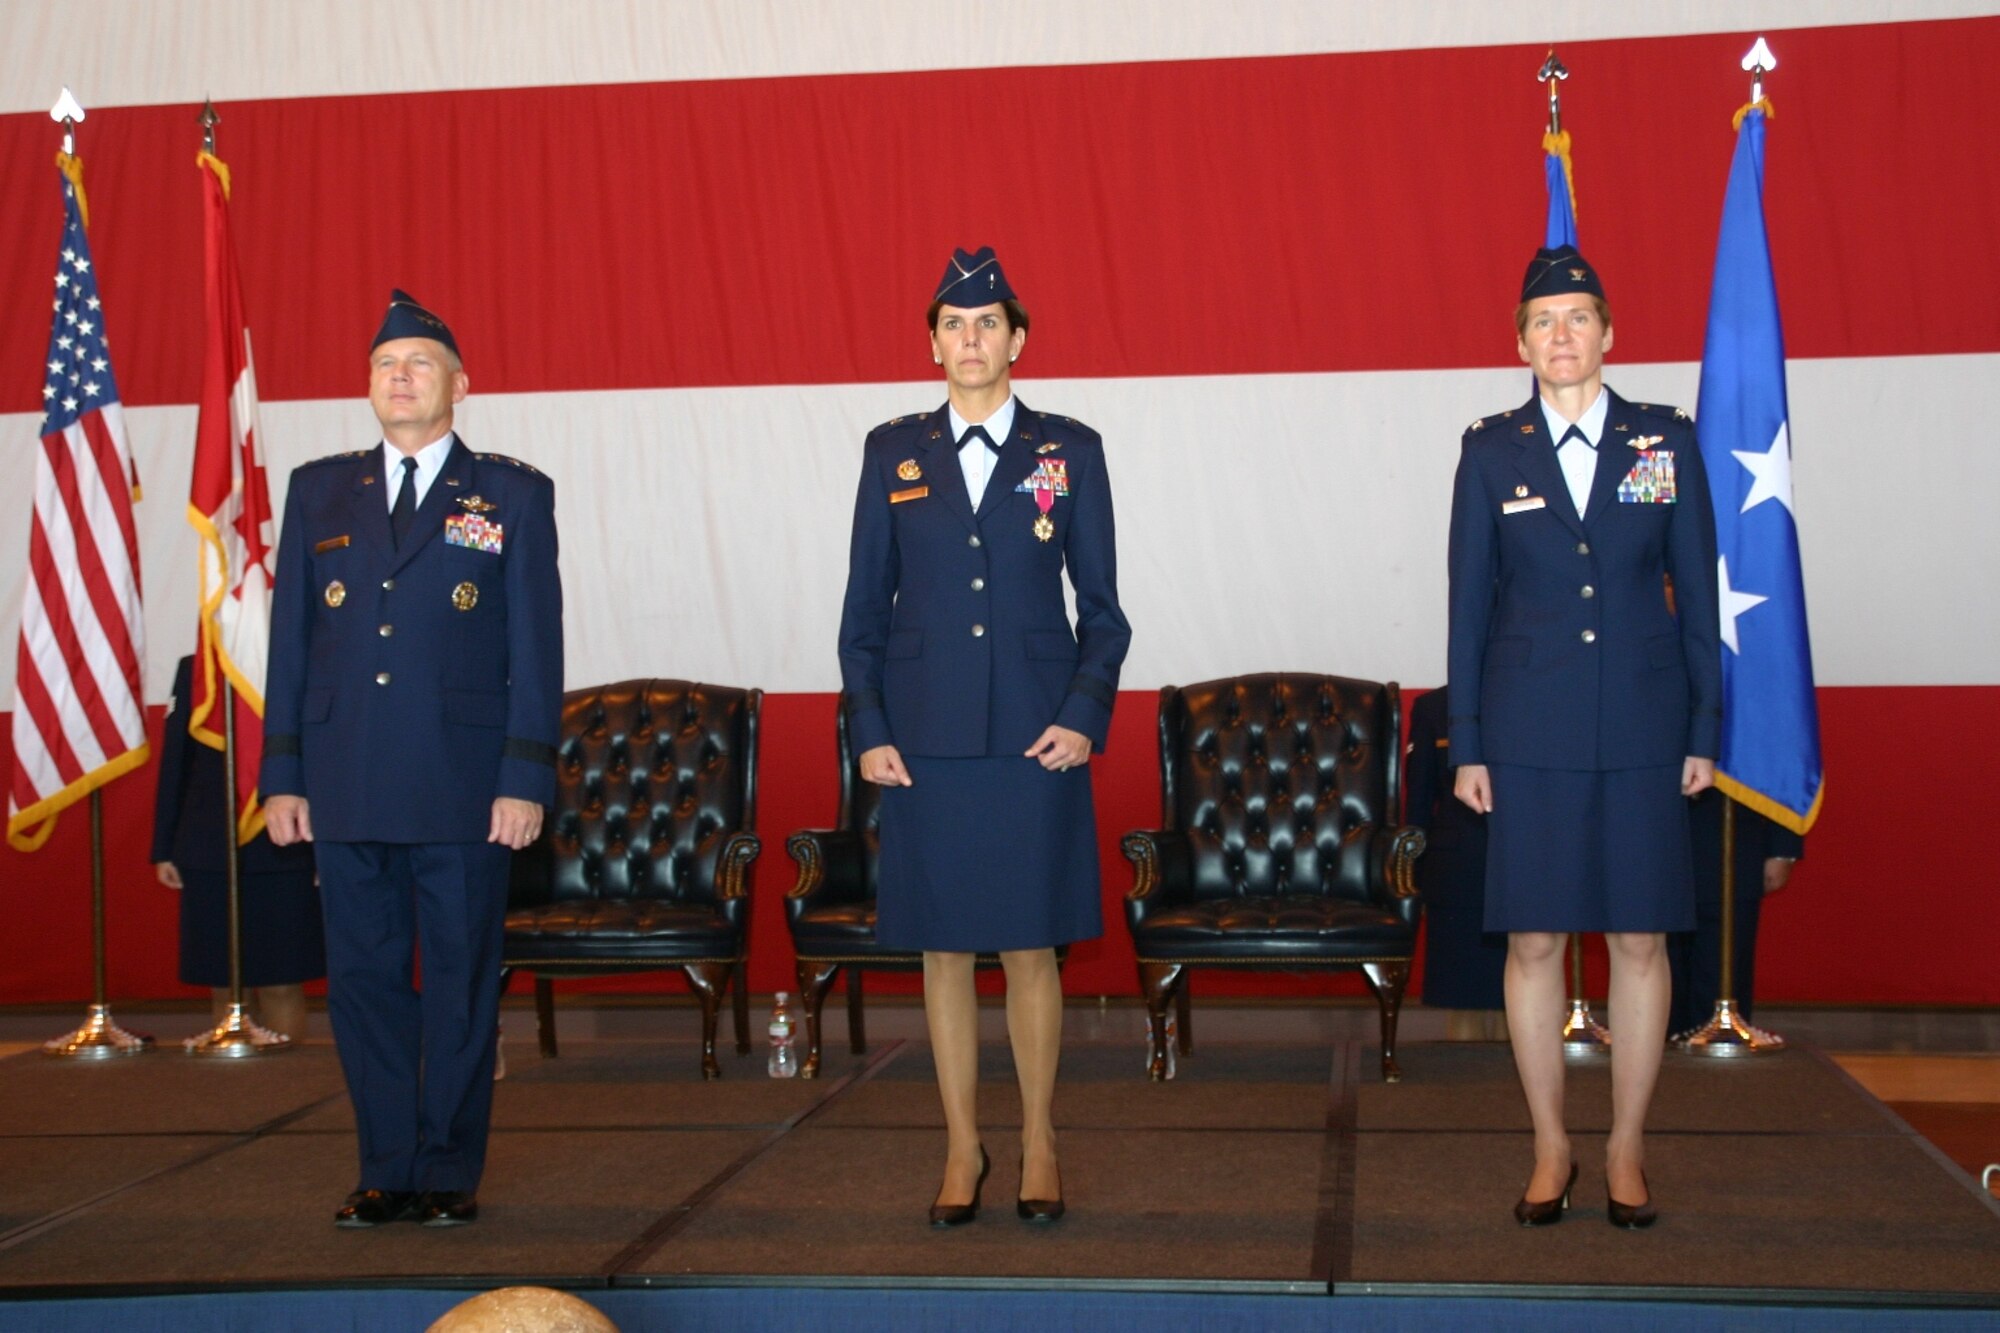 The official party stands at attention during the chang of command ceremony. From left to right: Lt. Gen. Robert Elder, Commander, 8th Air Force; Brig. Gen. Lori Robinson, outgoing 552 Air Control Wing Commander; and Col. Patricia Hoffman, incoming 552 Air Control Wing Commander.